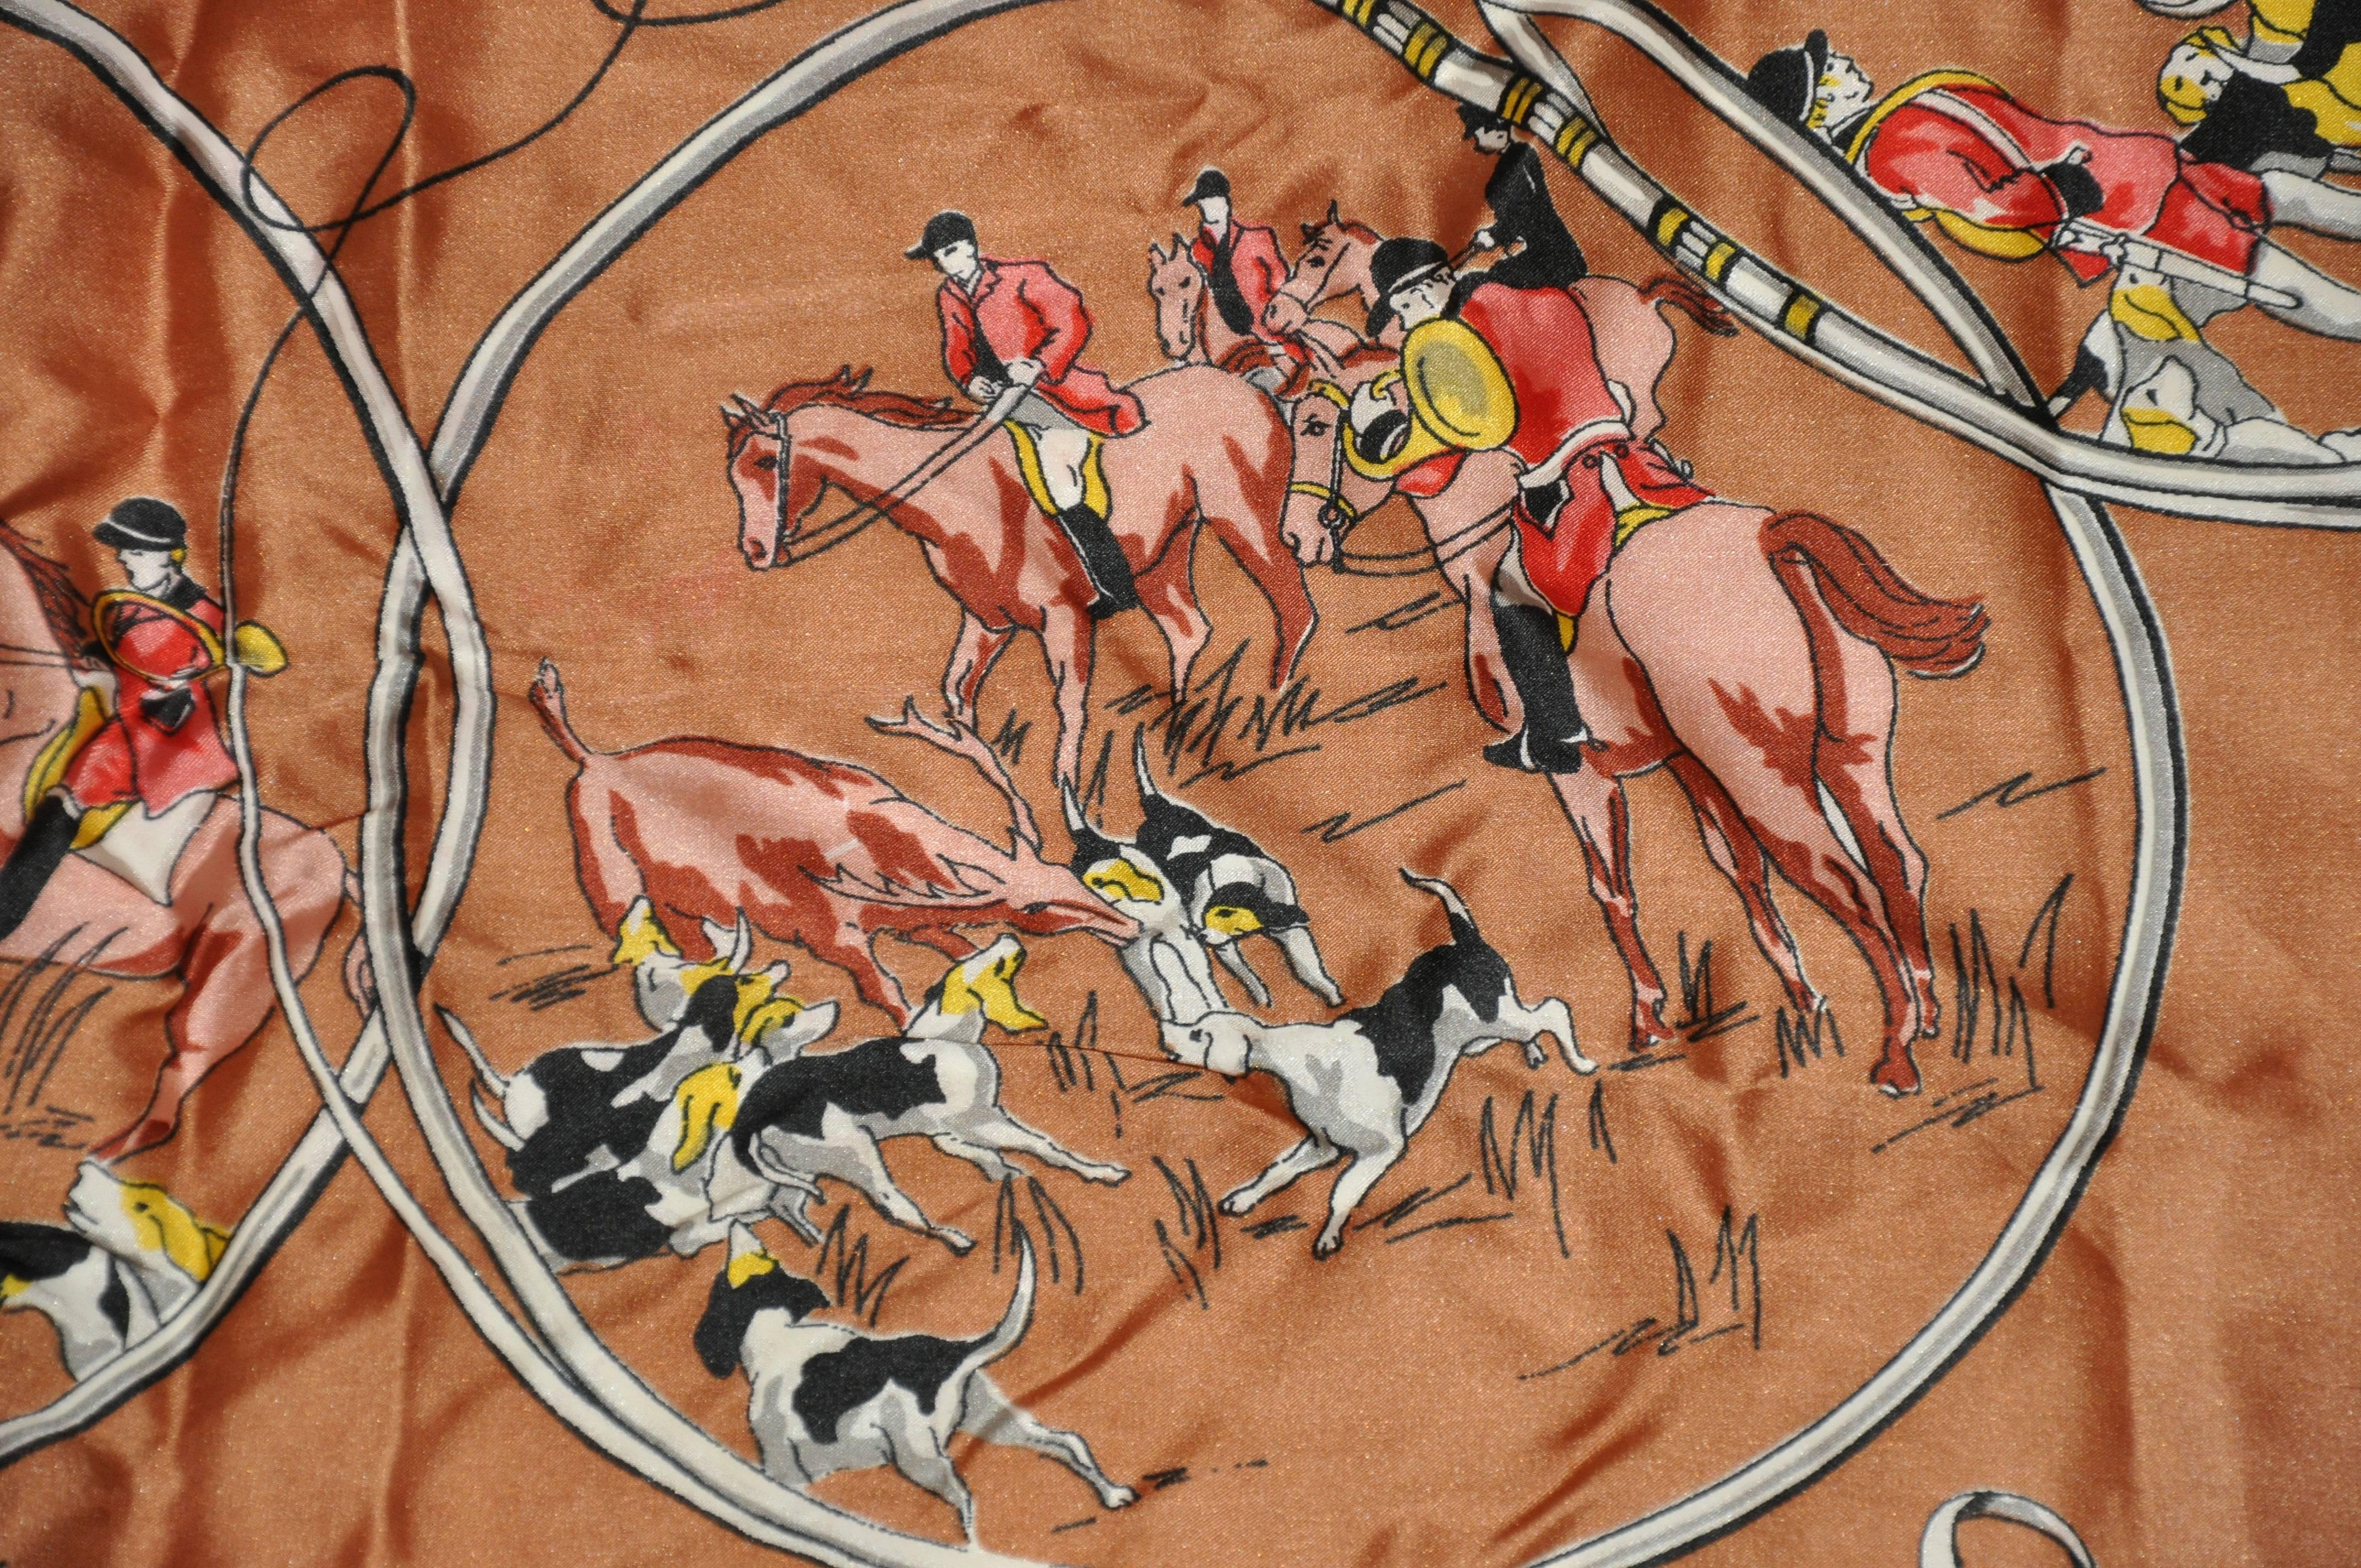 "Fox Hunting & French Horns" silk scarf measures 31" x 31" and finished with hand-rolled edges. Made in Italy.